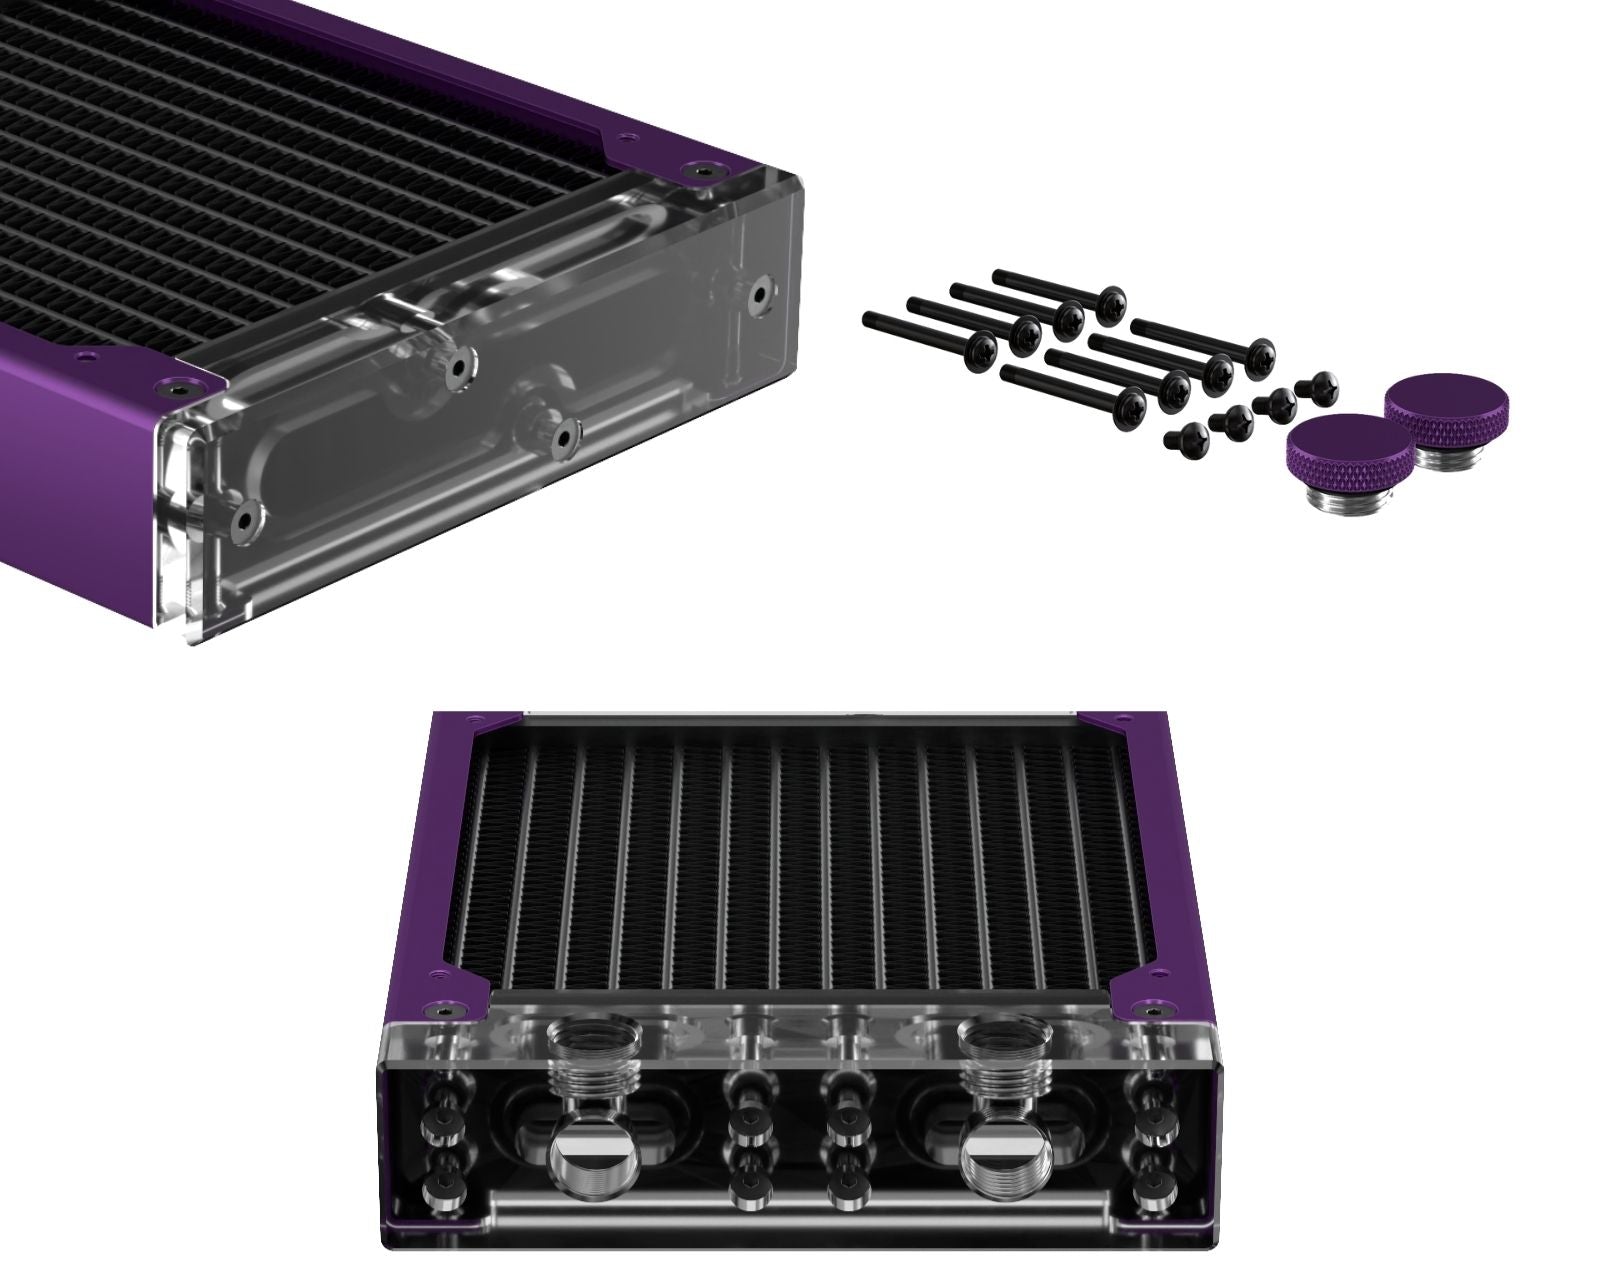 PrimoChill 240SL (30mm) EXIMO Modular Radiator, Clear Acrylic, 2x120mm, Dual Fan (R-SL-A24) Available in 20+ Colors, Assembled in USA and Custom Watercooling Loop Ready - Candy Purple